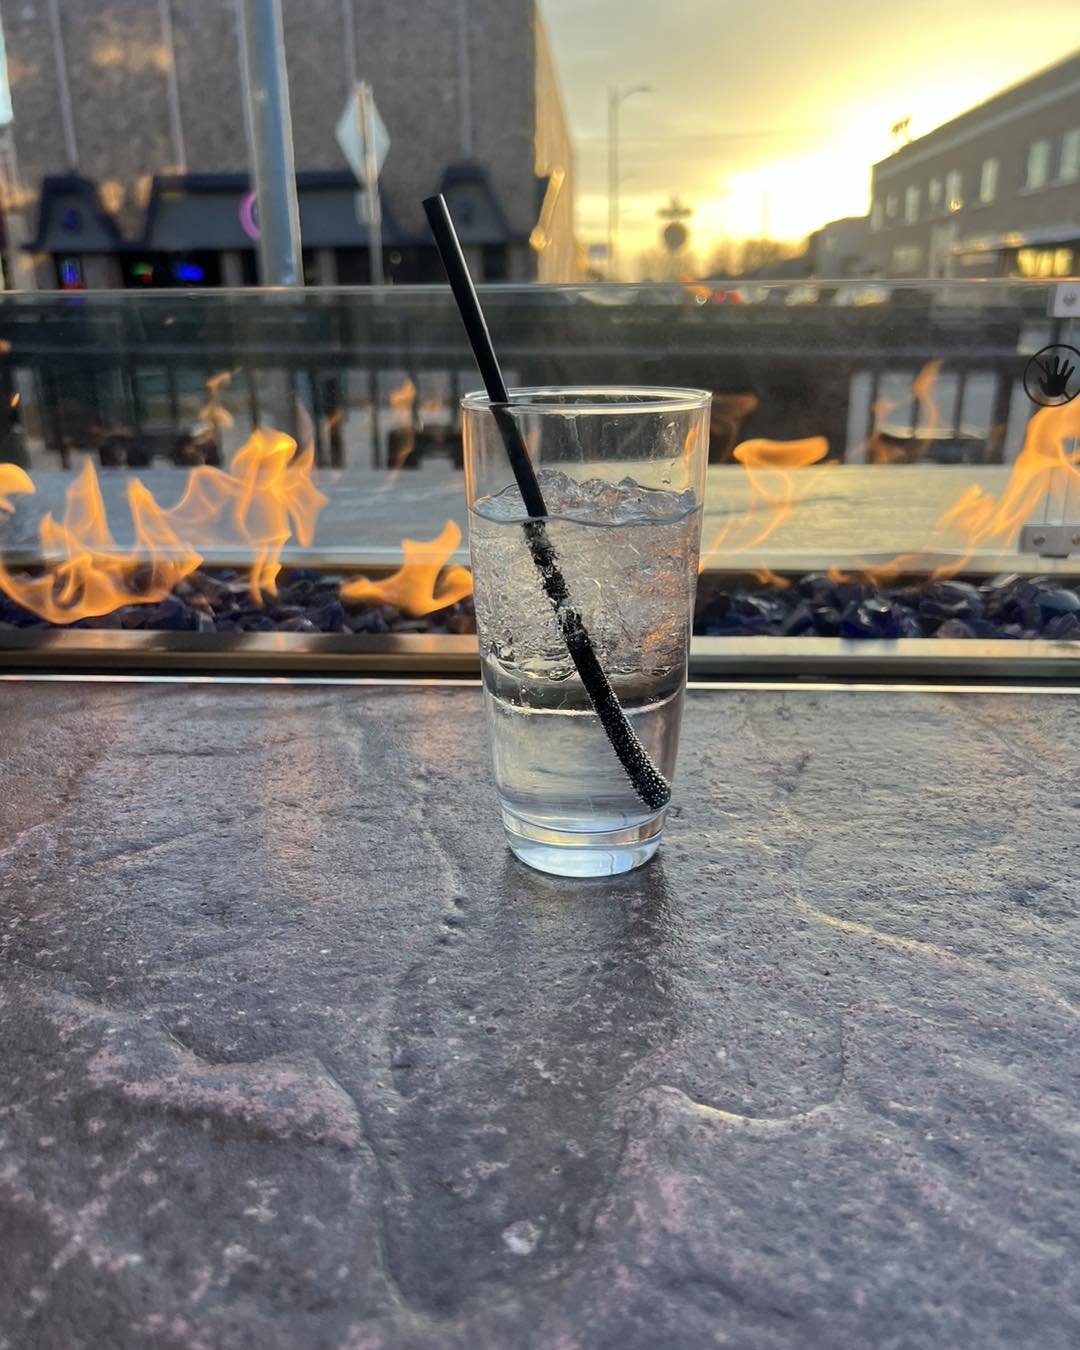 Summer's here and so are extended hours! 🌞 We're open until 11pm on Fridays and Saturdays. Perfect for enjoying the weather on our outdoor patio and sipping our expertly crafted cocktails. 🍹🌇 #PowerhouseSocial #PowerhouseonBroadway #Scottsbluff #N